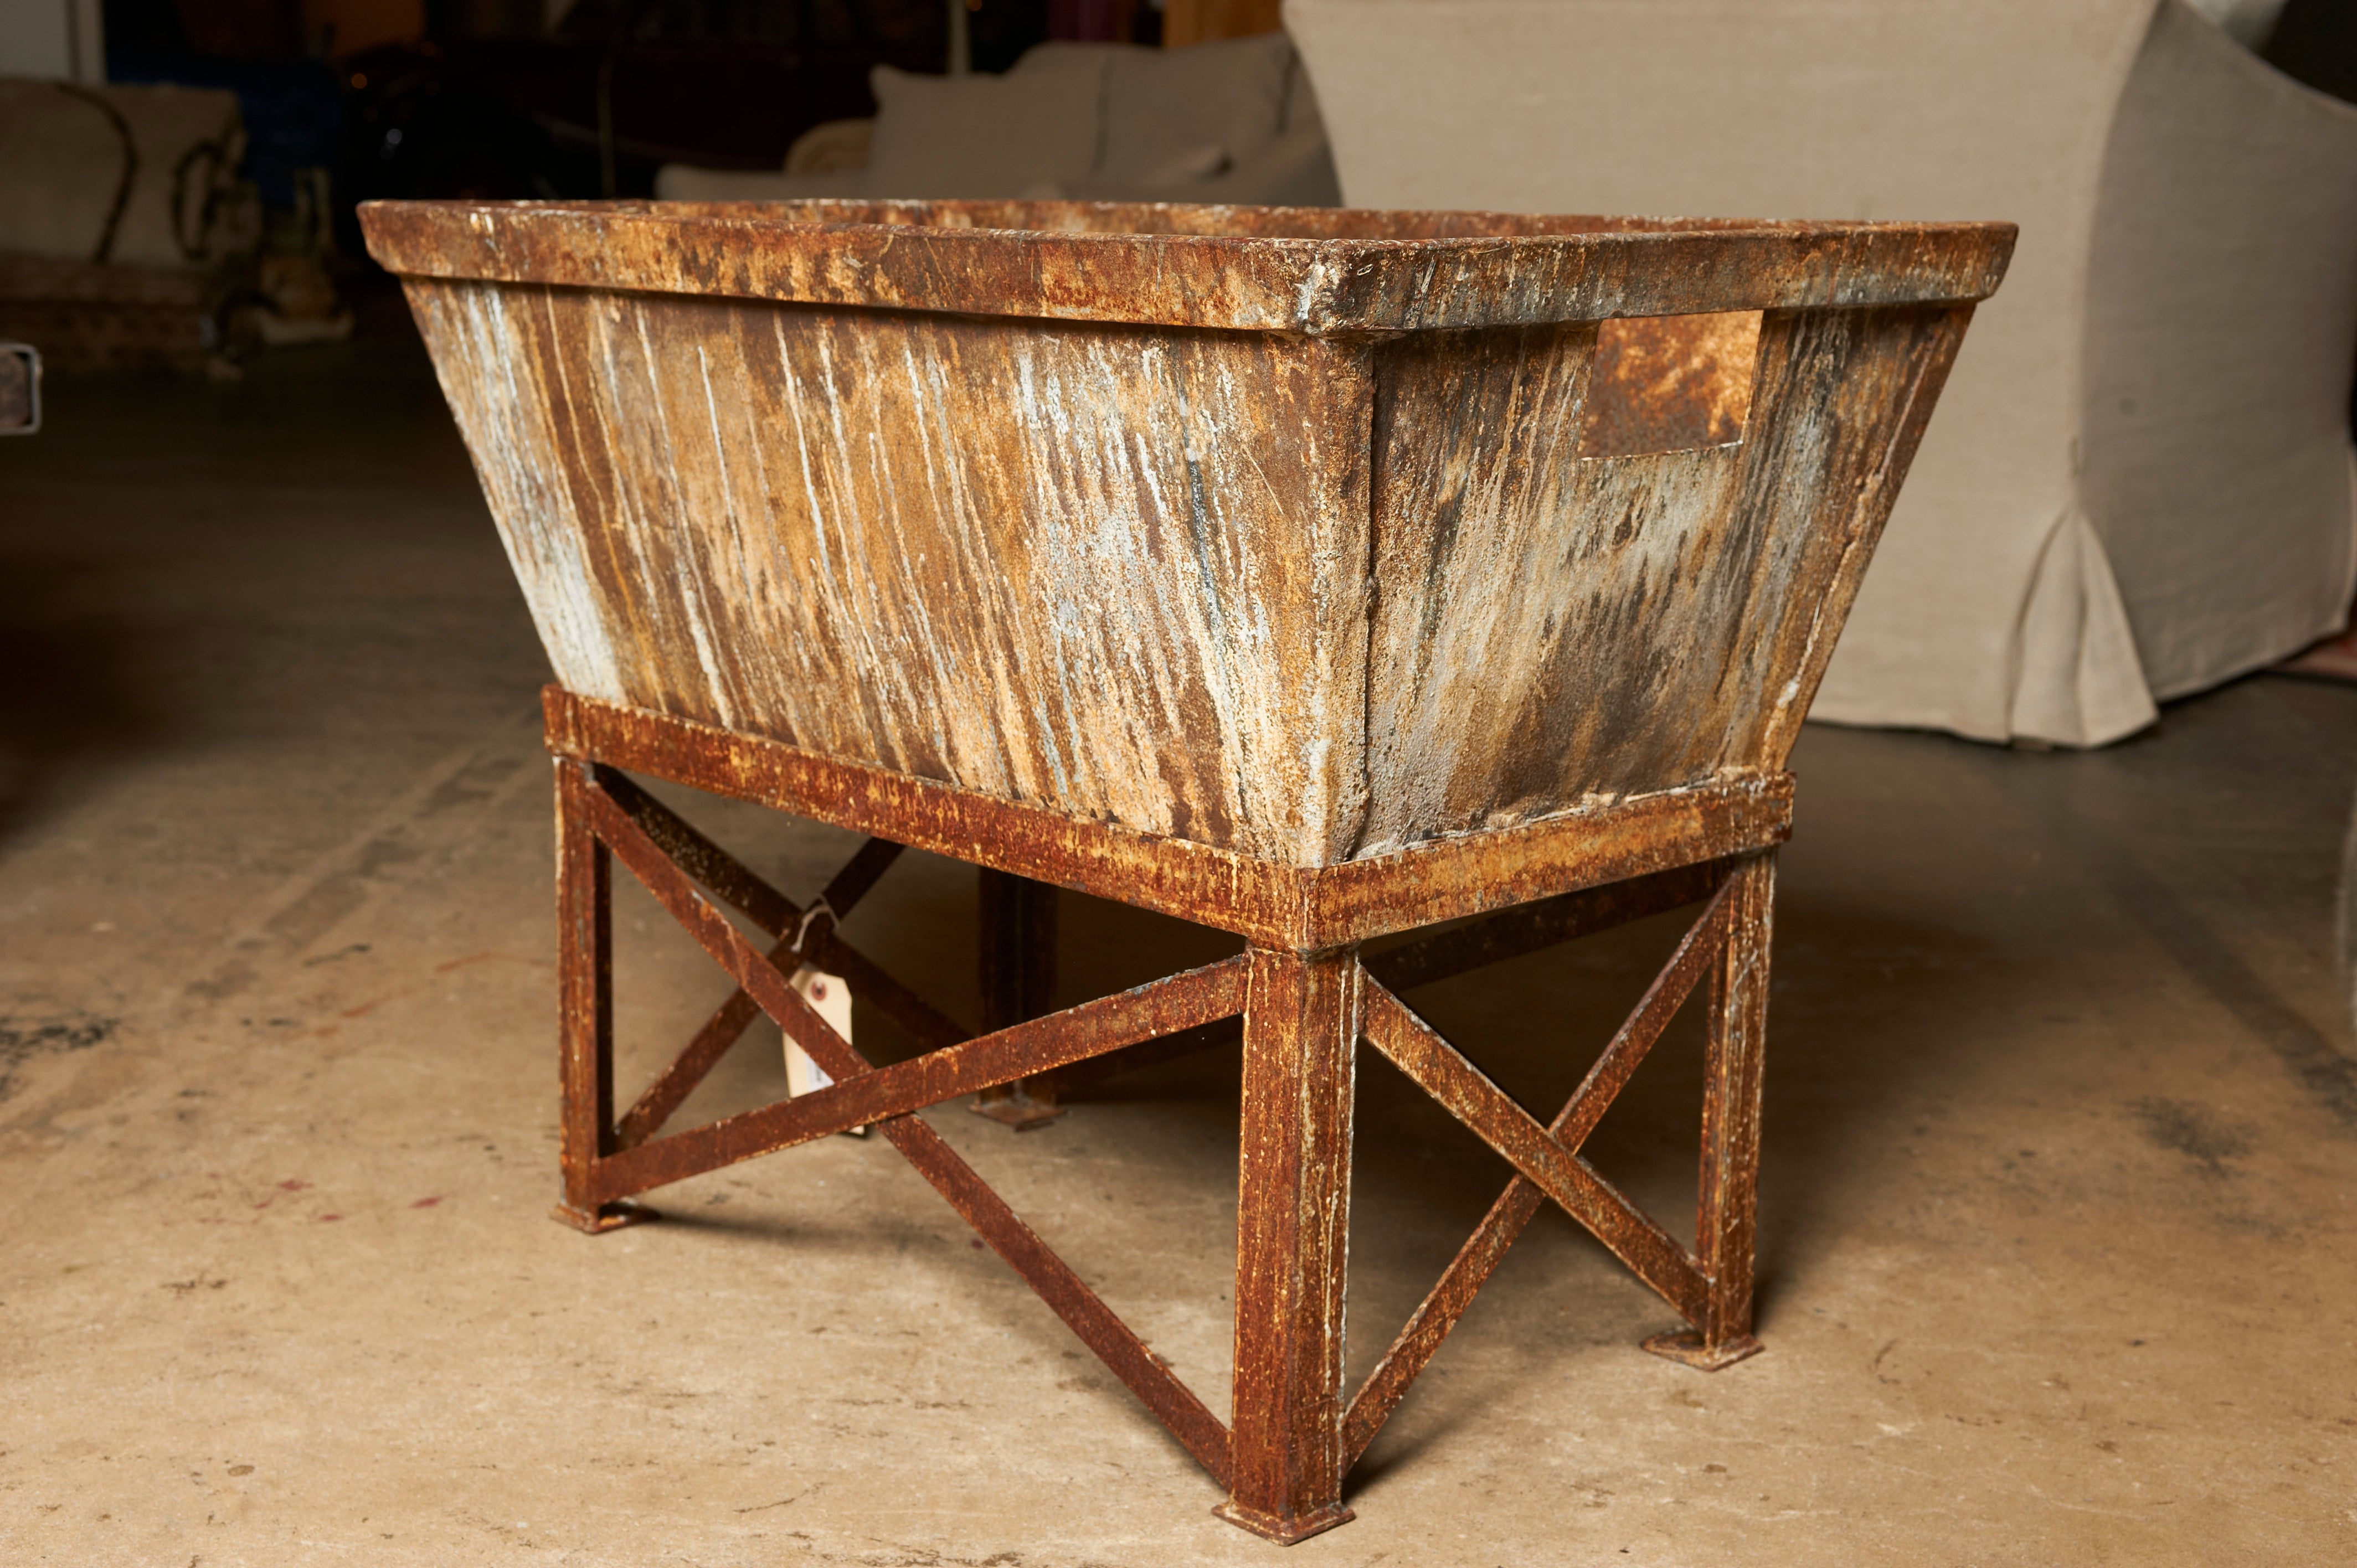 Industrial iron factory bin on stand, c. 1940-50, now a jardiniere For Sale